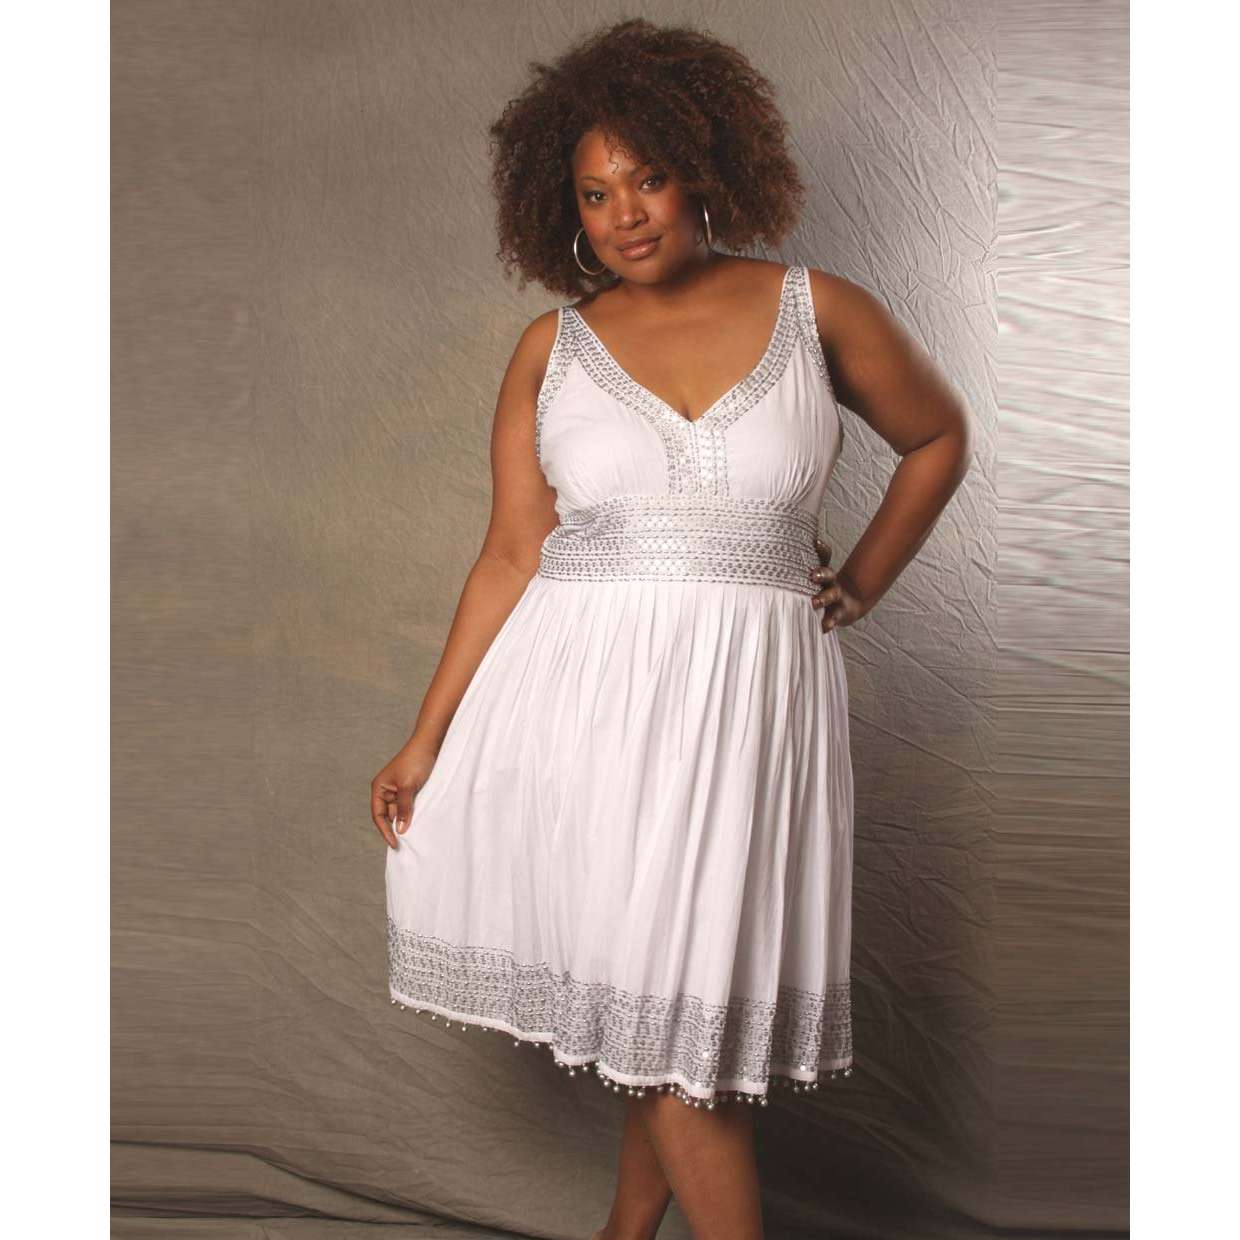 White Dress Pictures: Plus Size White Summer Dress